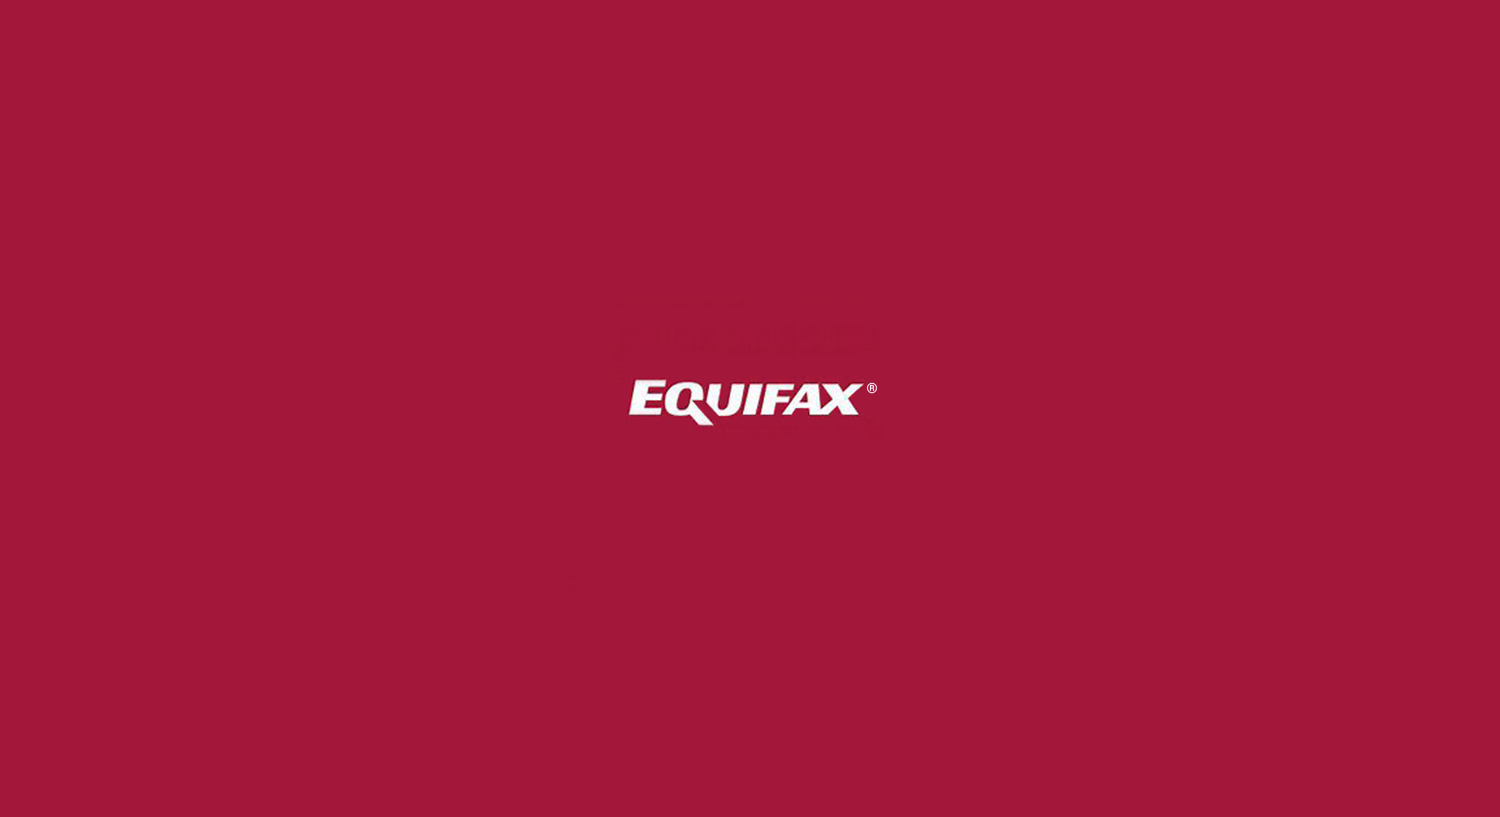 Equifax Data Breach: Information & Guidance for WST Clients